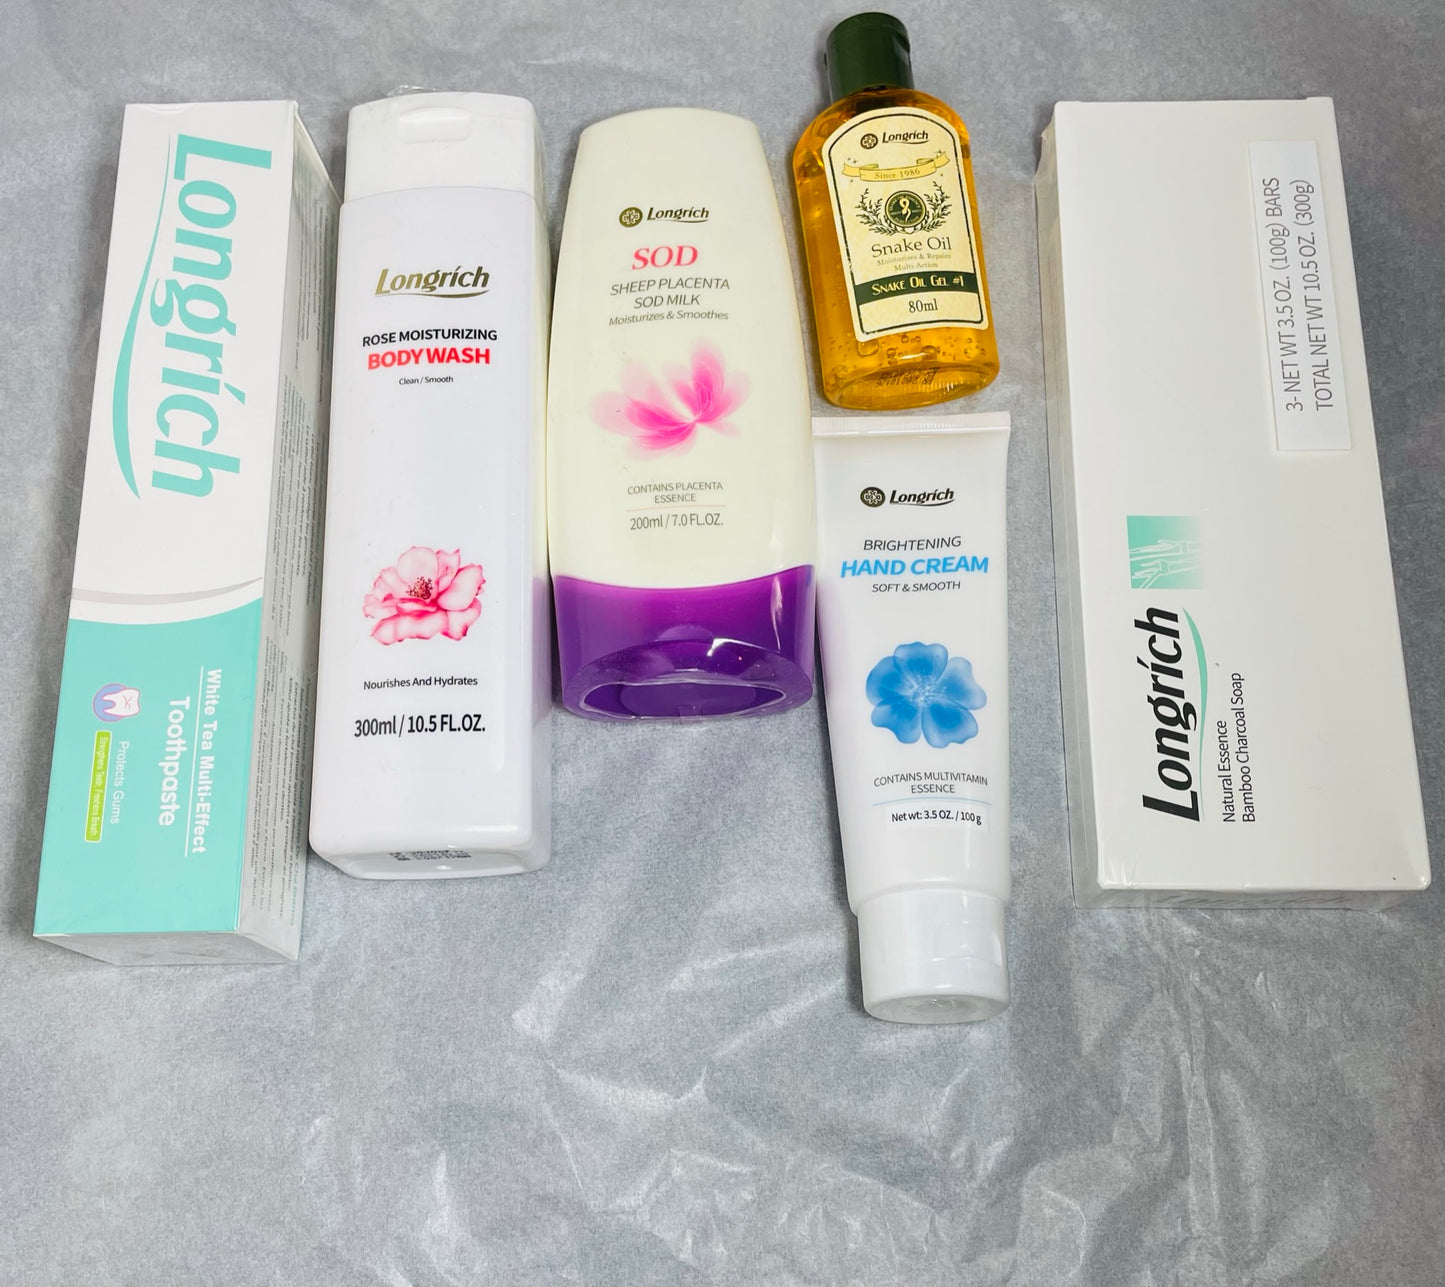 Longrich Skincare  Glow / Fights Pimples and Acne